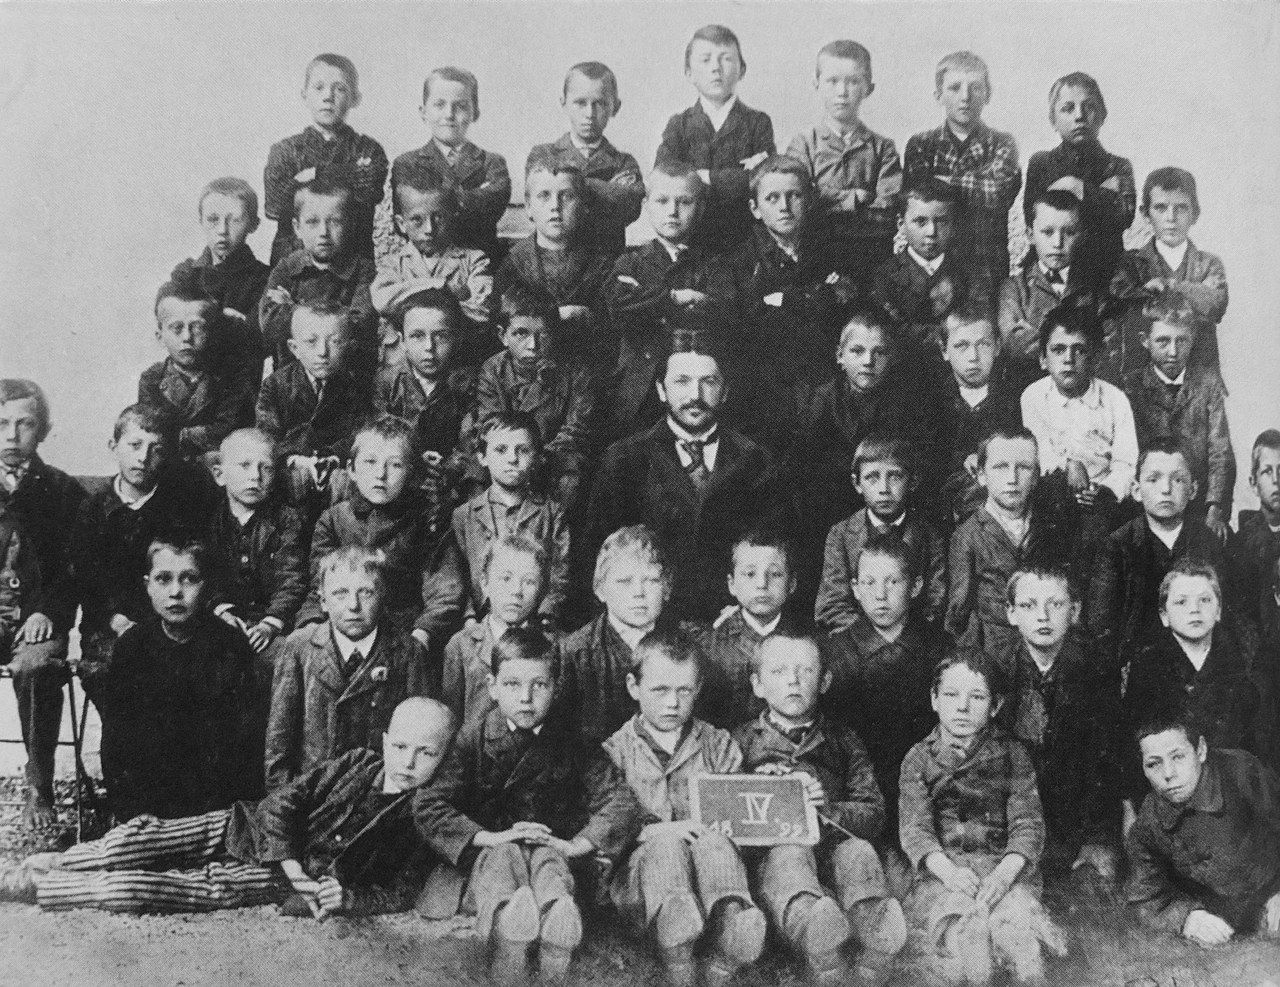 Adolf Hitler at the age of 10 (middle of the top row) with his classmates in Leonding